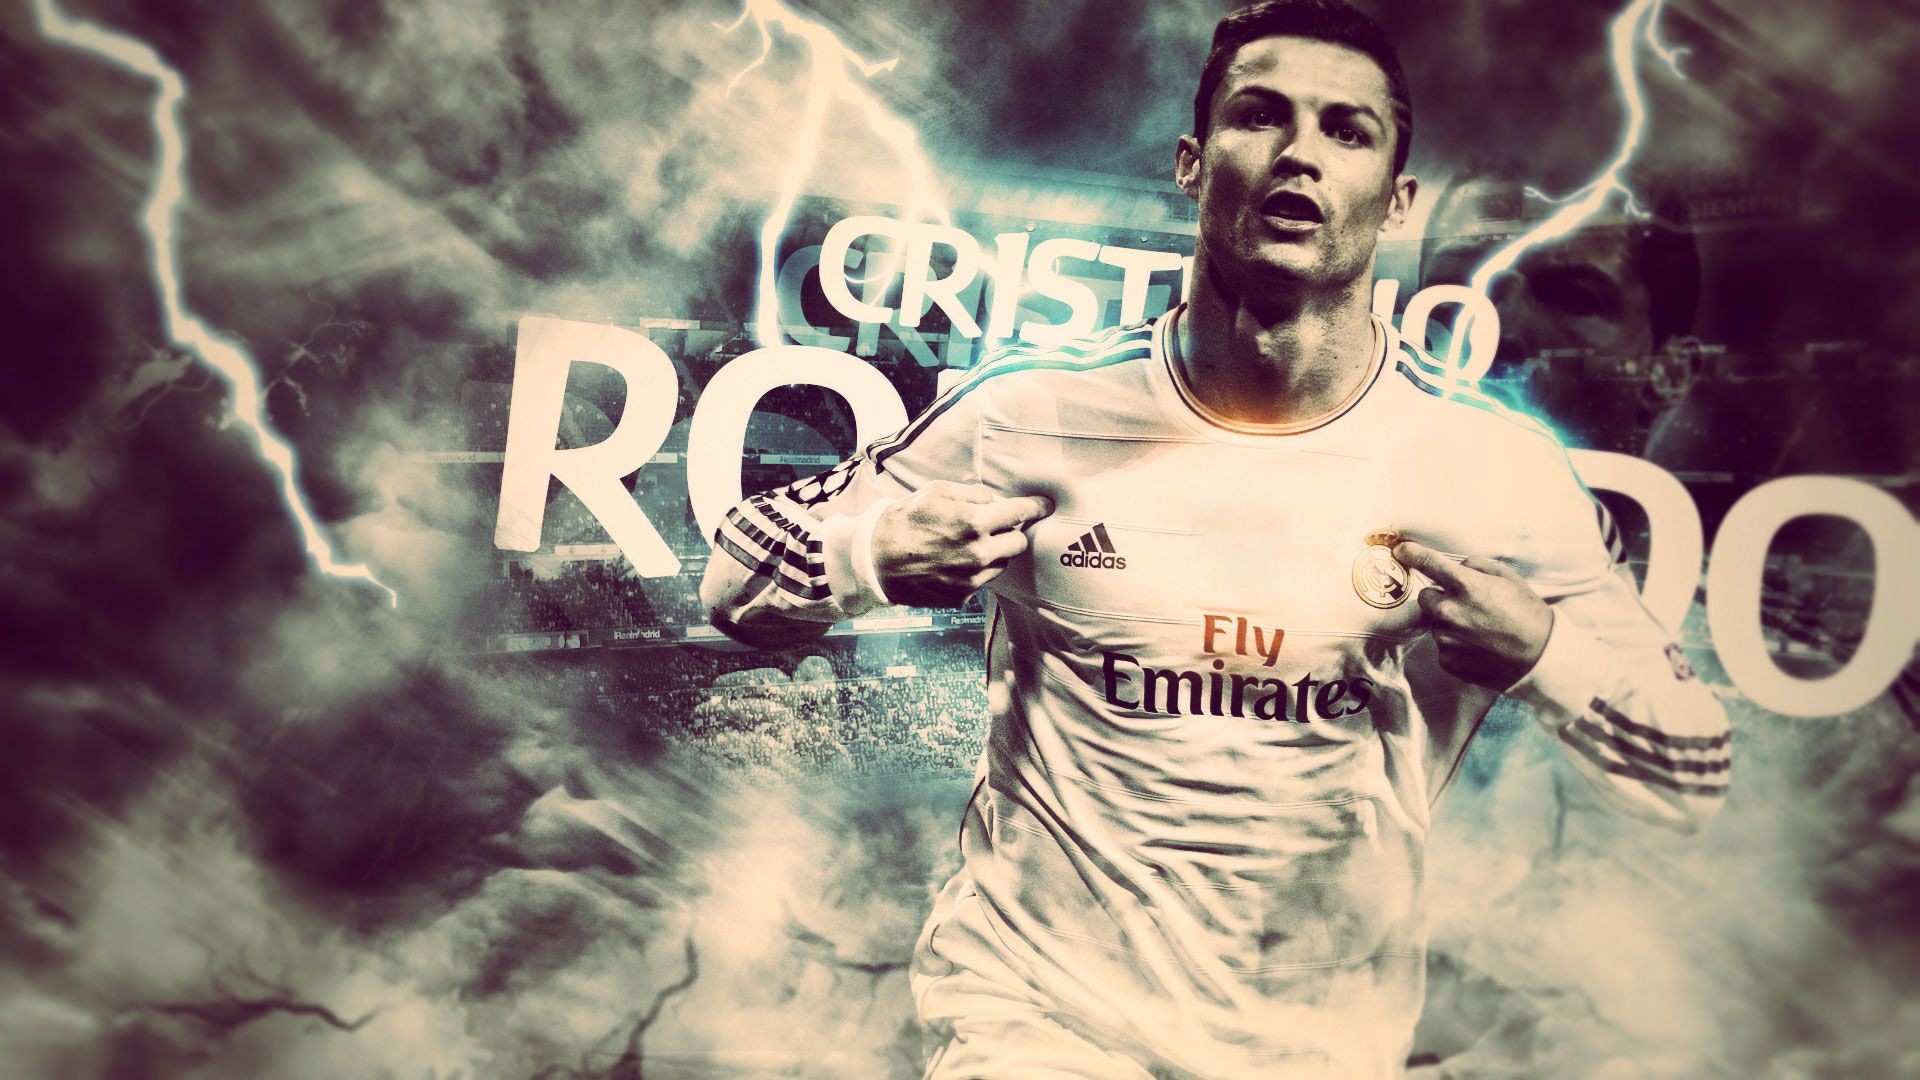 1920x1080 Cr7 Wallpapers For Iphone For Widescreen Wallpaper